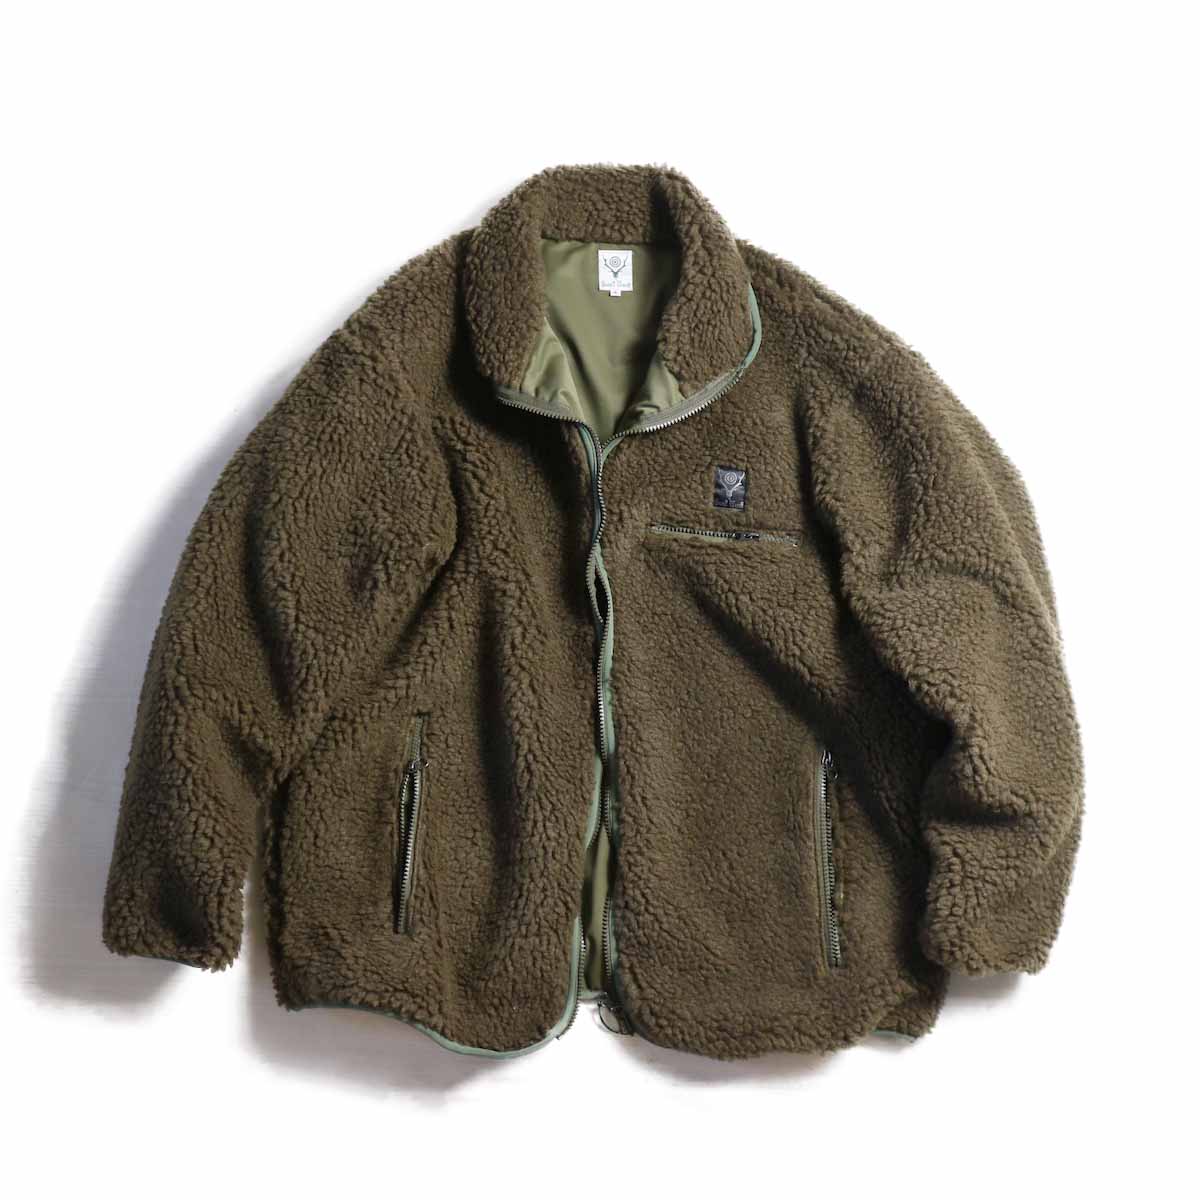 Very Goods | SOUTH2 WEST8 / Piping Jacket -Synthetic Pile(Olive)